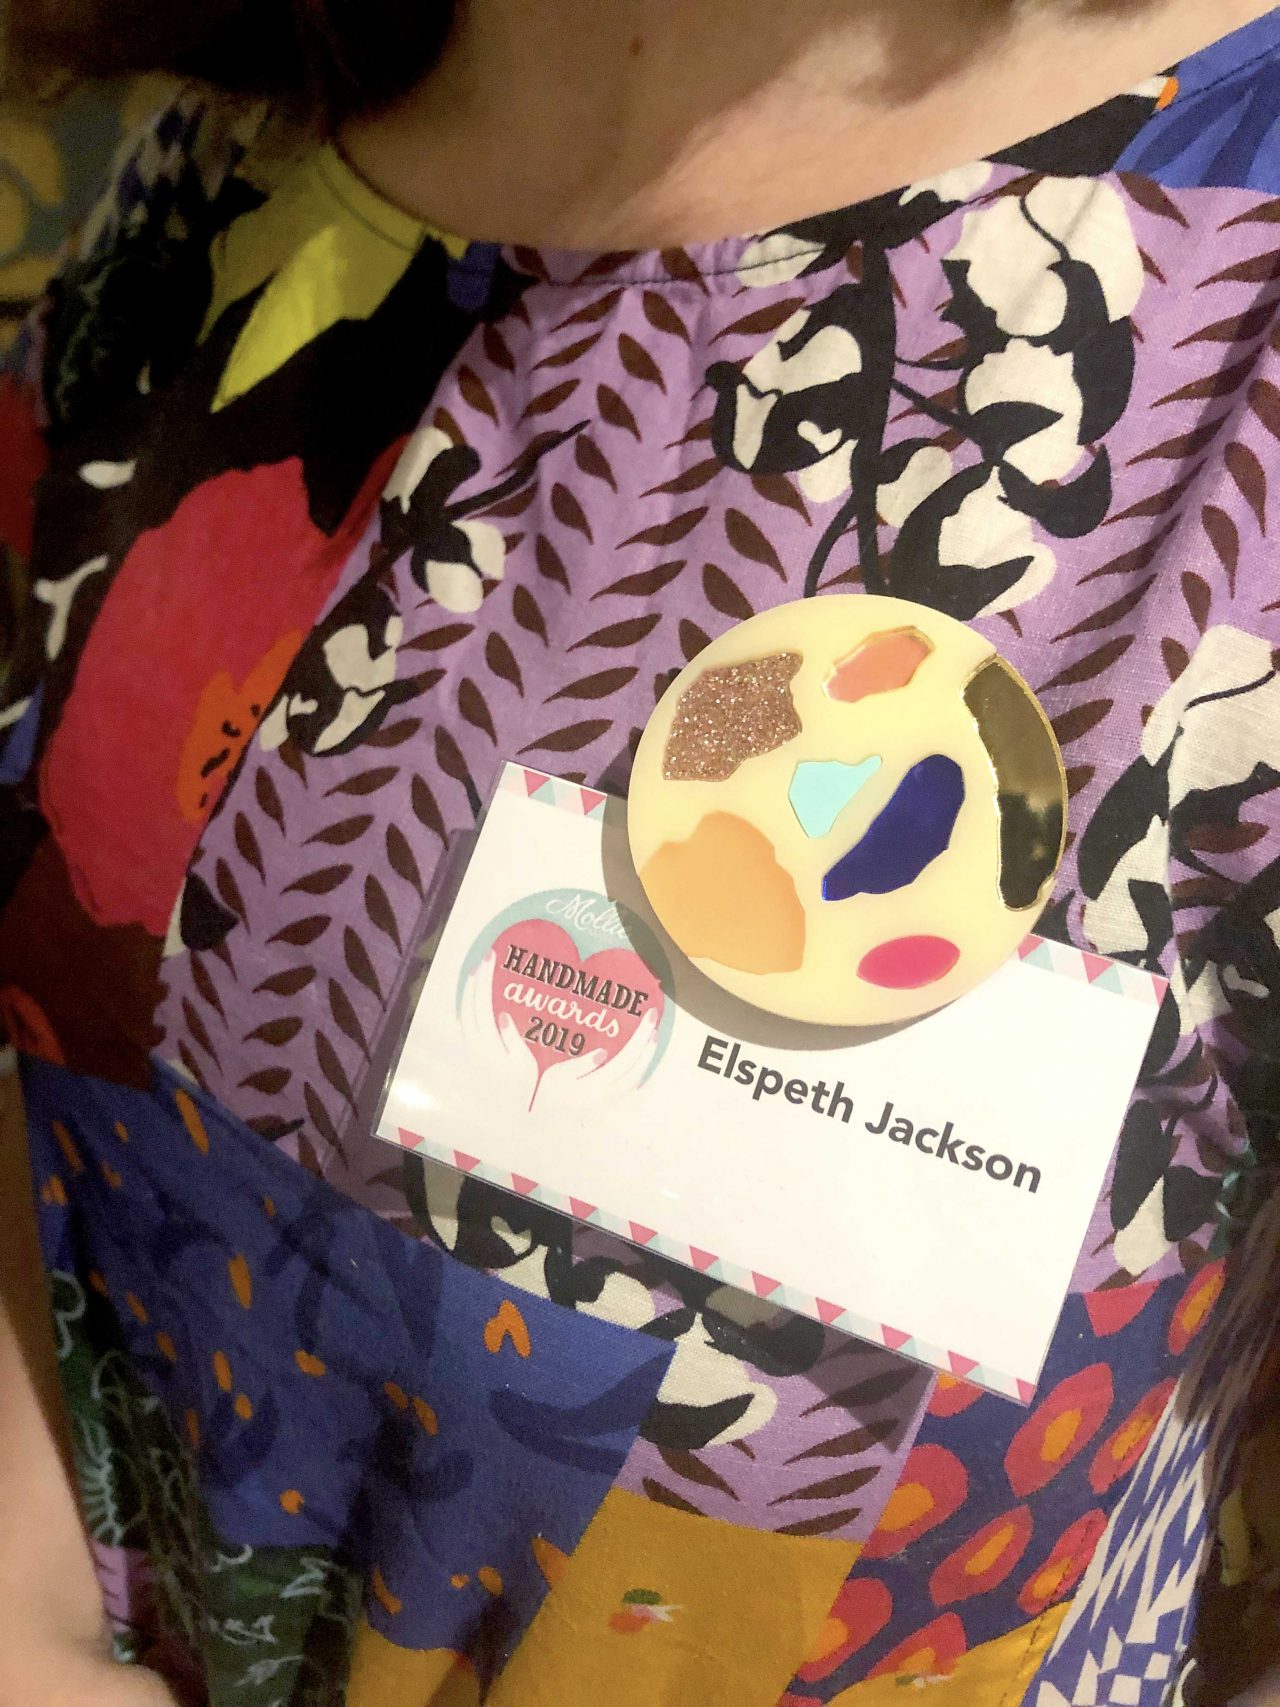 Elspeth Jackson from Ragged Life modelling her Rosa Pietsch Terrazzo Brooch from the Mollie Makes Handmade Awards 2019